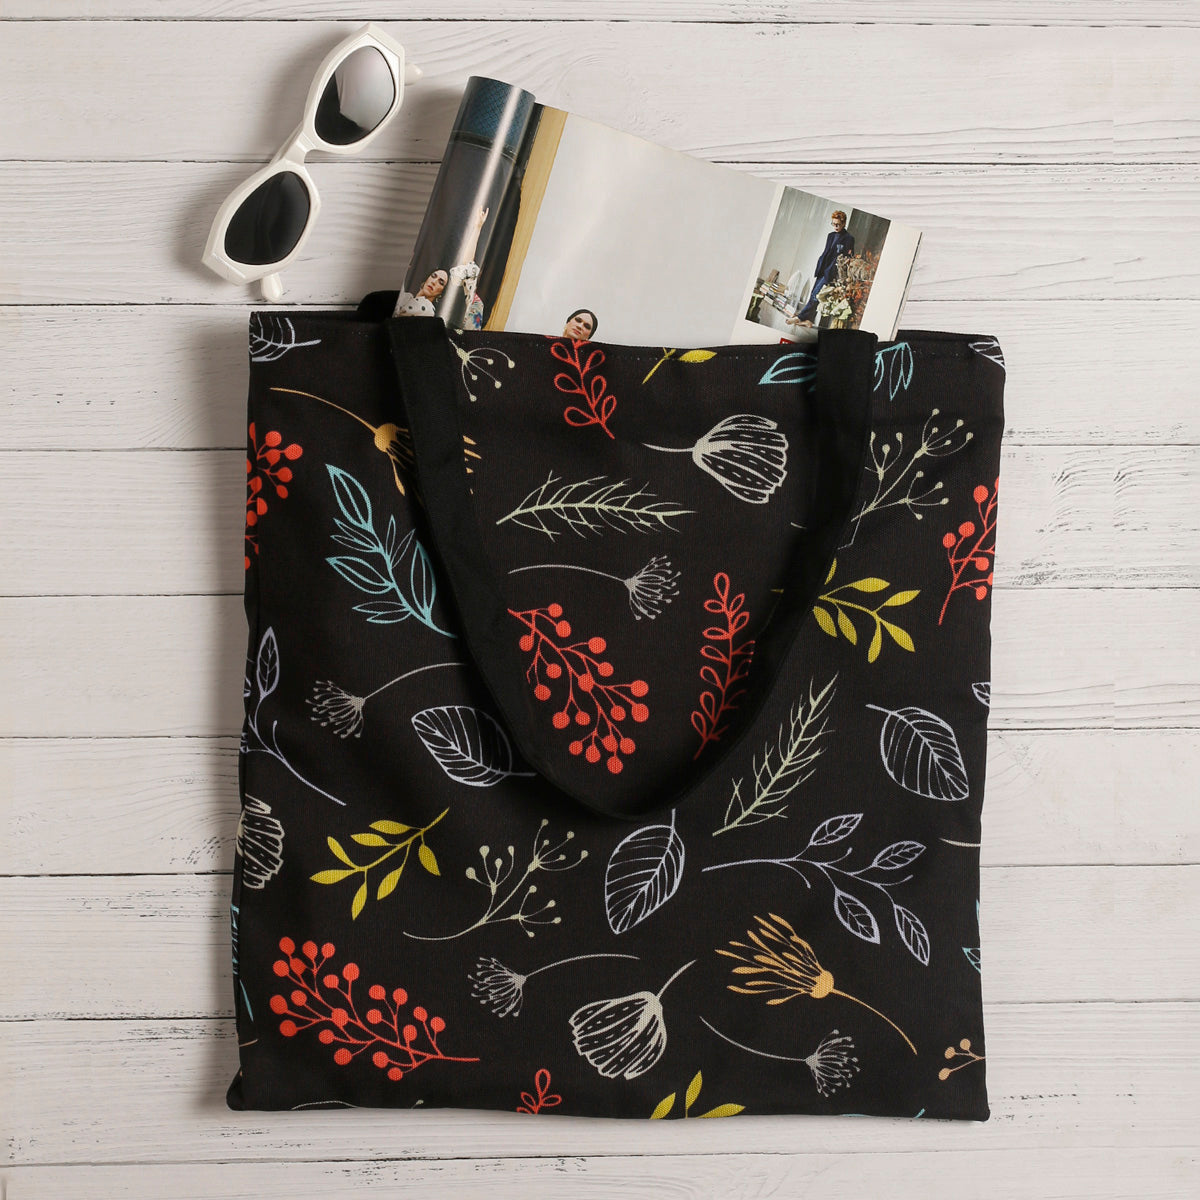 A black tote bag adorned with vibrant leaves and flowers, adding a pop of color to its elegant design.